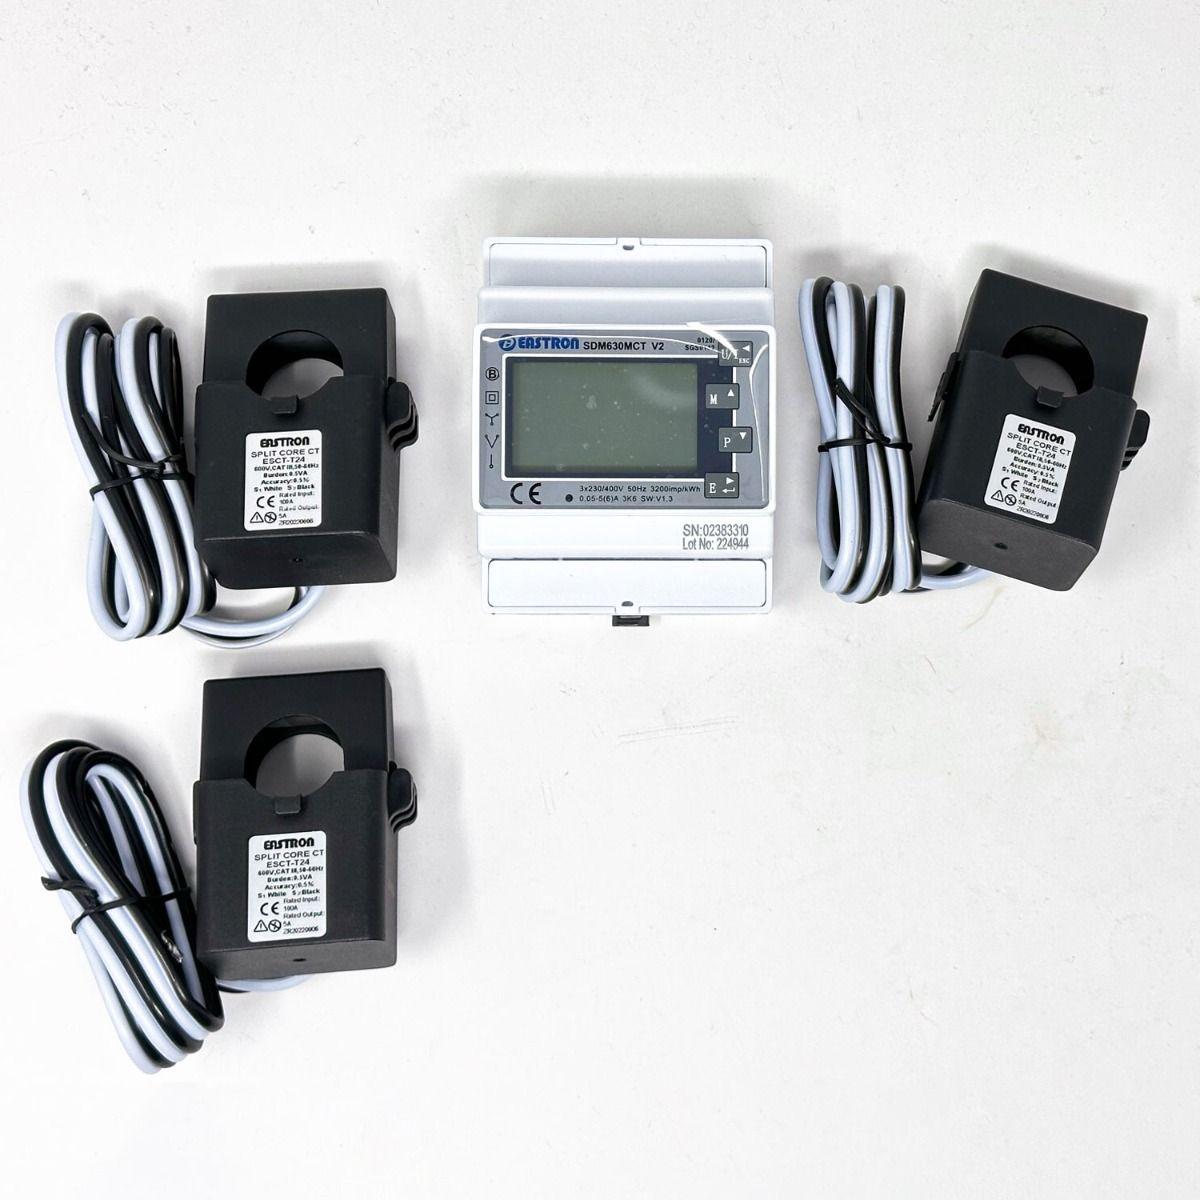 Eastron Energy Meter With Current Sensor (CT) Clamp Single And Three Phase SDM630MCT - VoltaconSolar